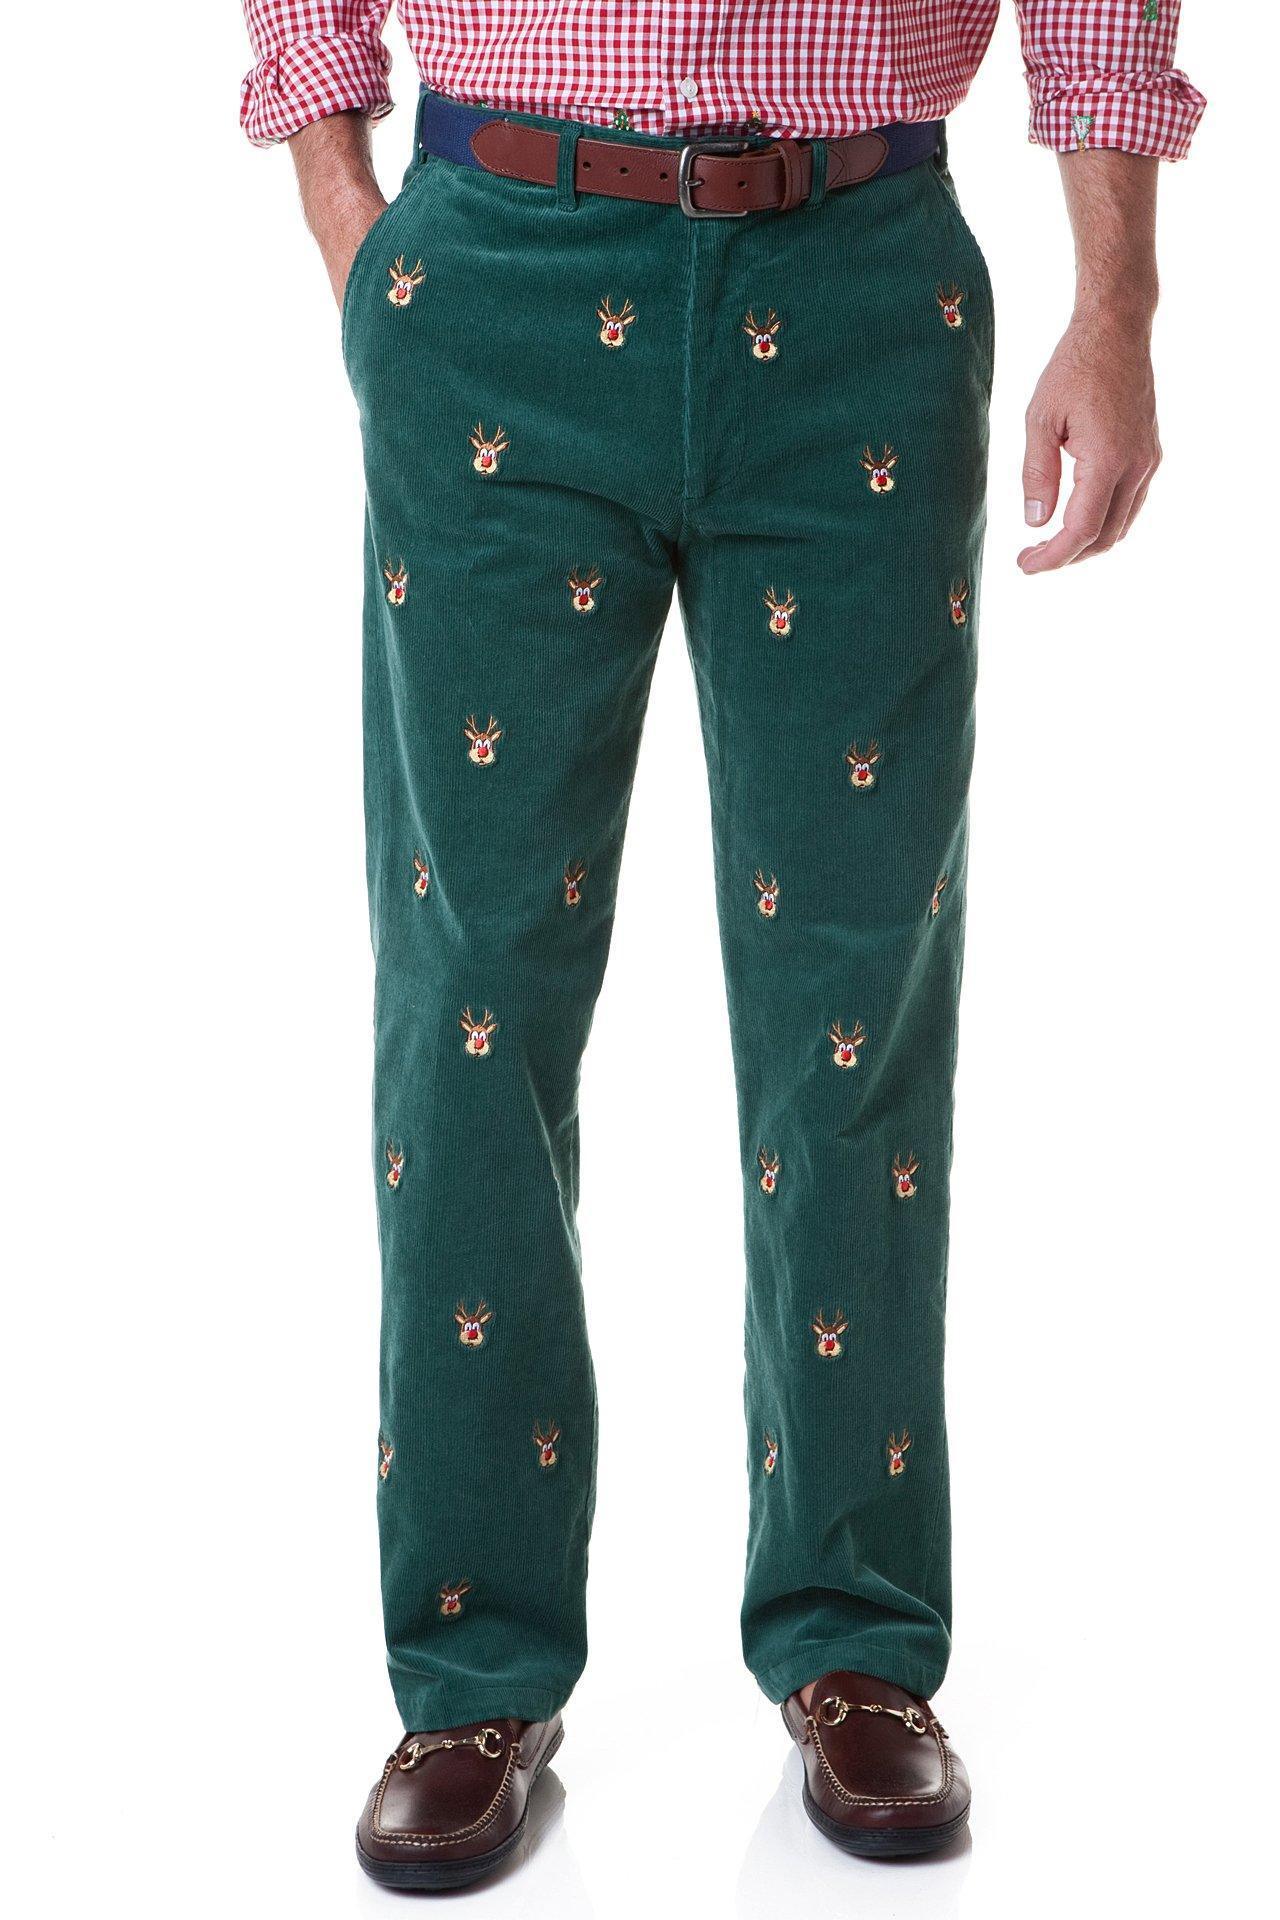 Beachcomber Cord Pant Hunter with Rudolph - MENS EMBROIDERED PANTS - Castaway Nantucket Island